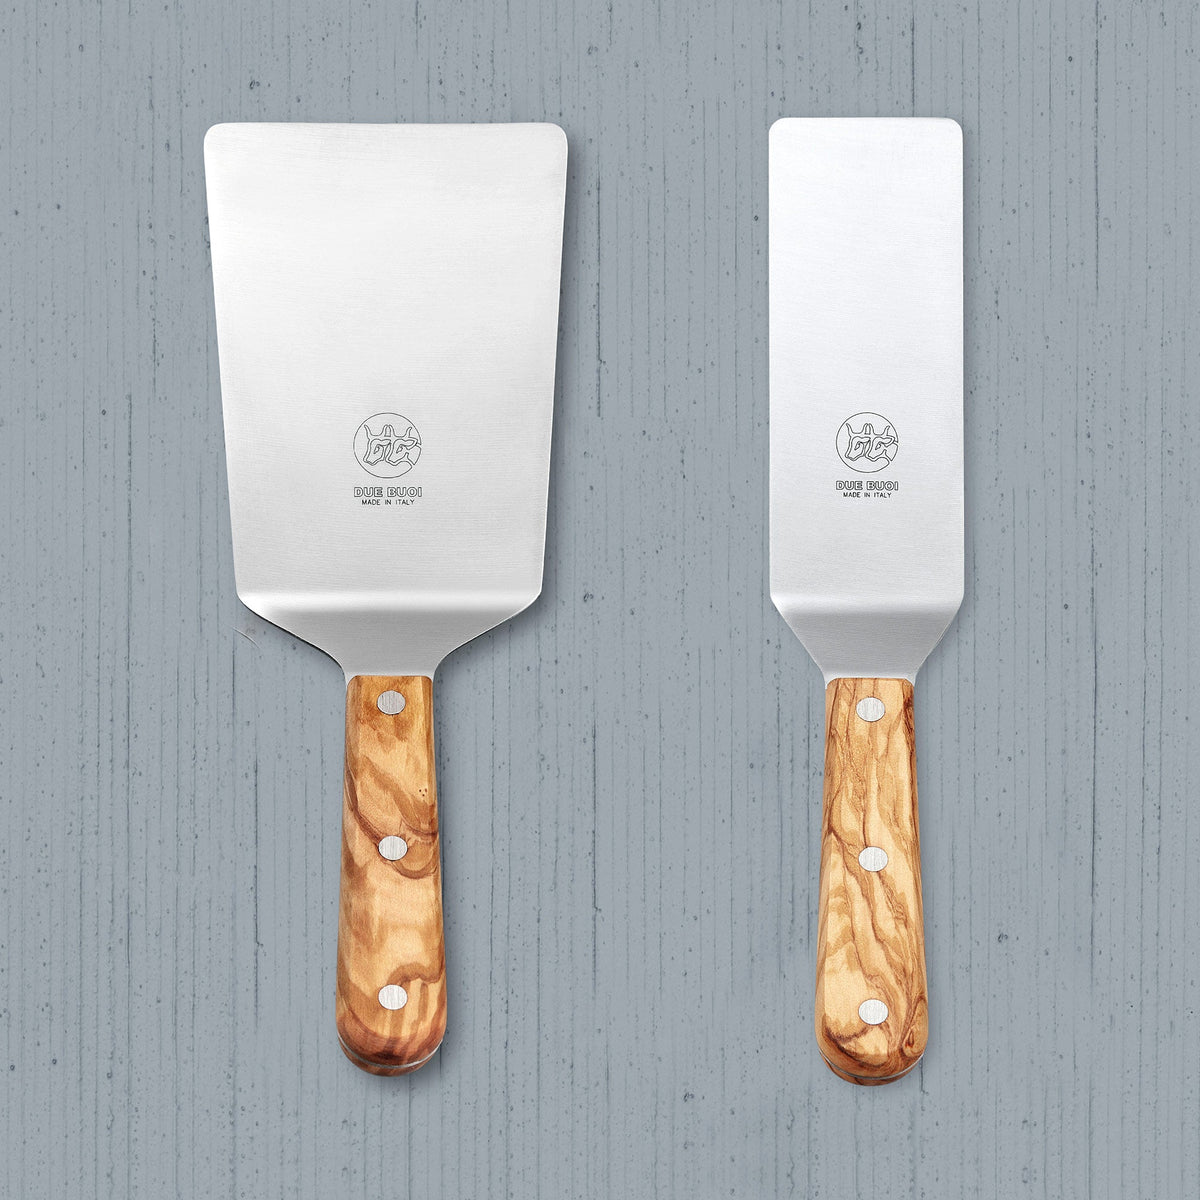 OLIVEWOOD WIDE SPATULA – Different Drummer's Kitchen, Inc.